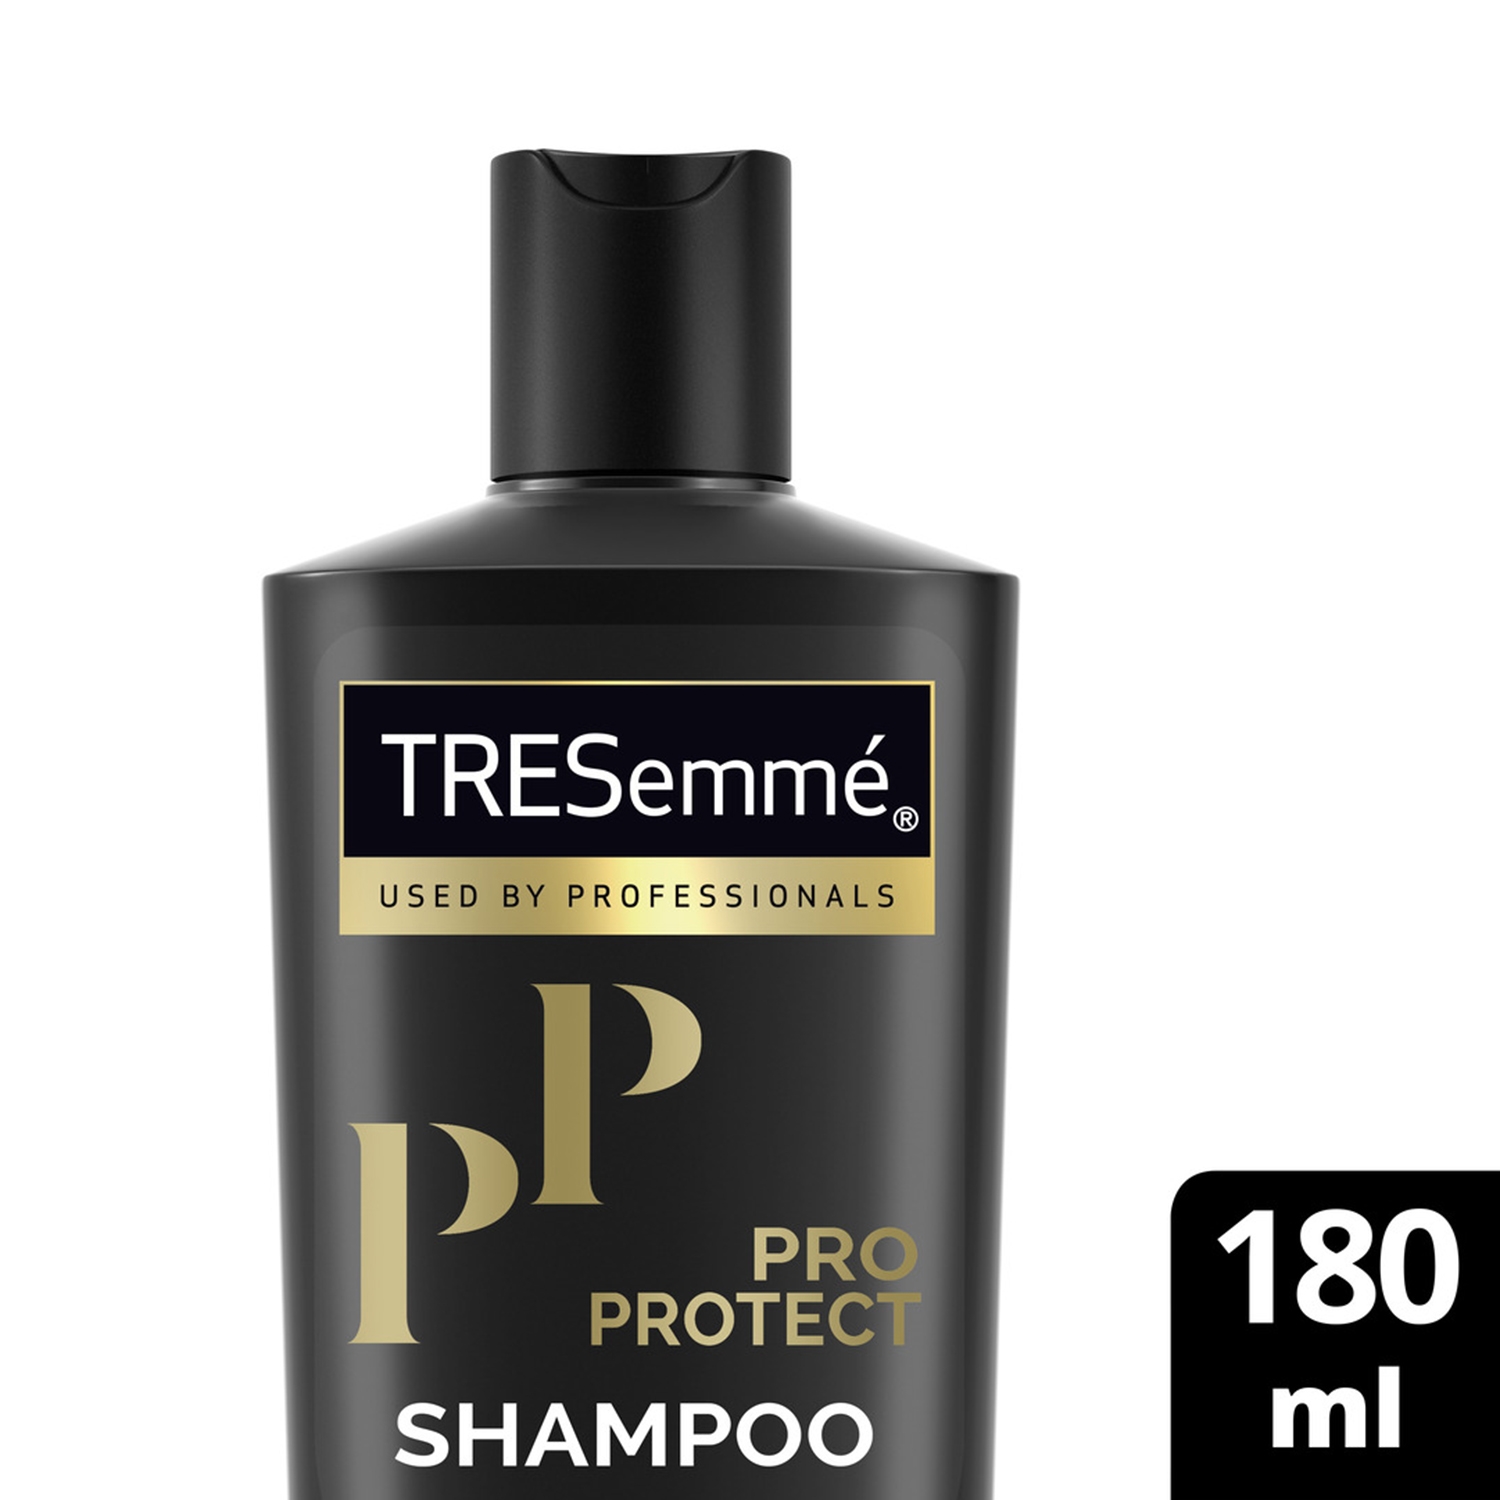 Tresemme | Tresemme Pro Protect Sulphate Free Shampoo with Moroccan Argan Oil (180ml)